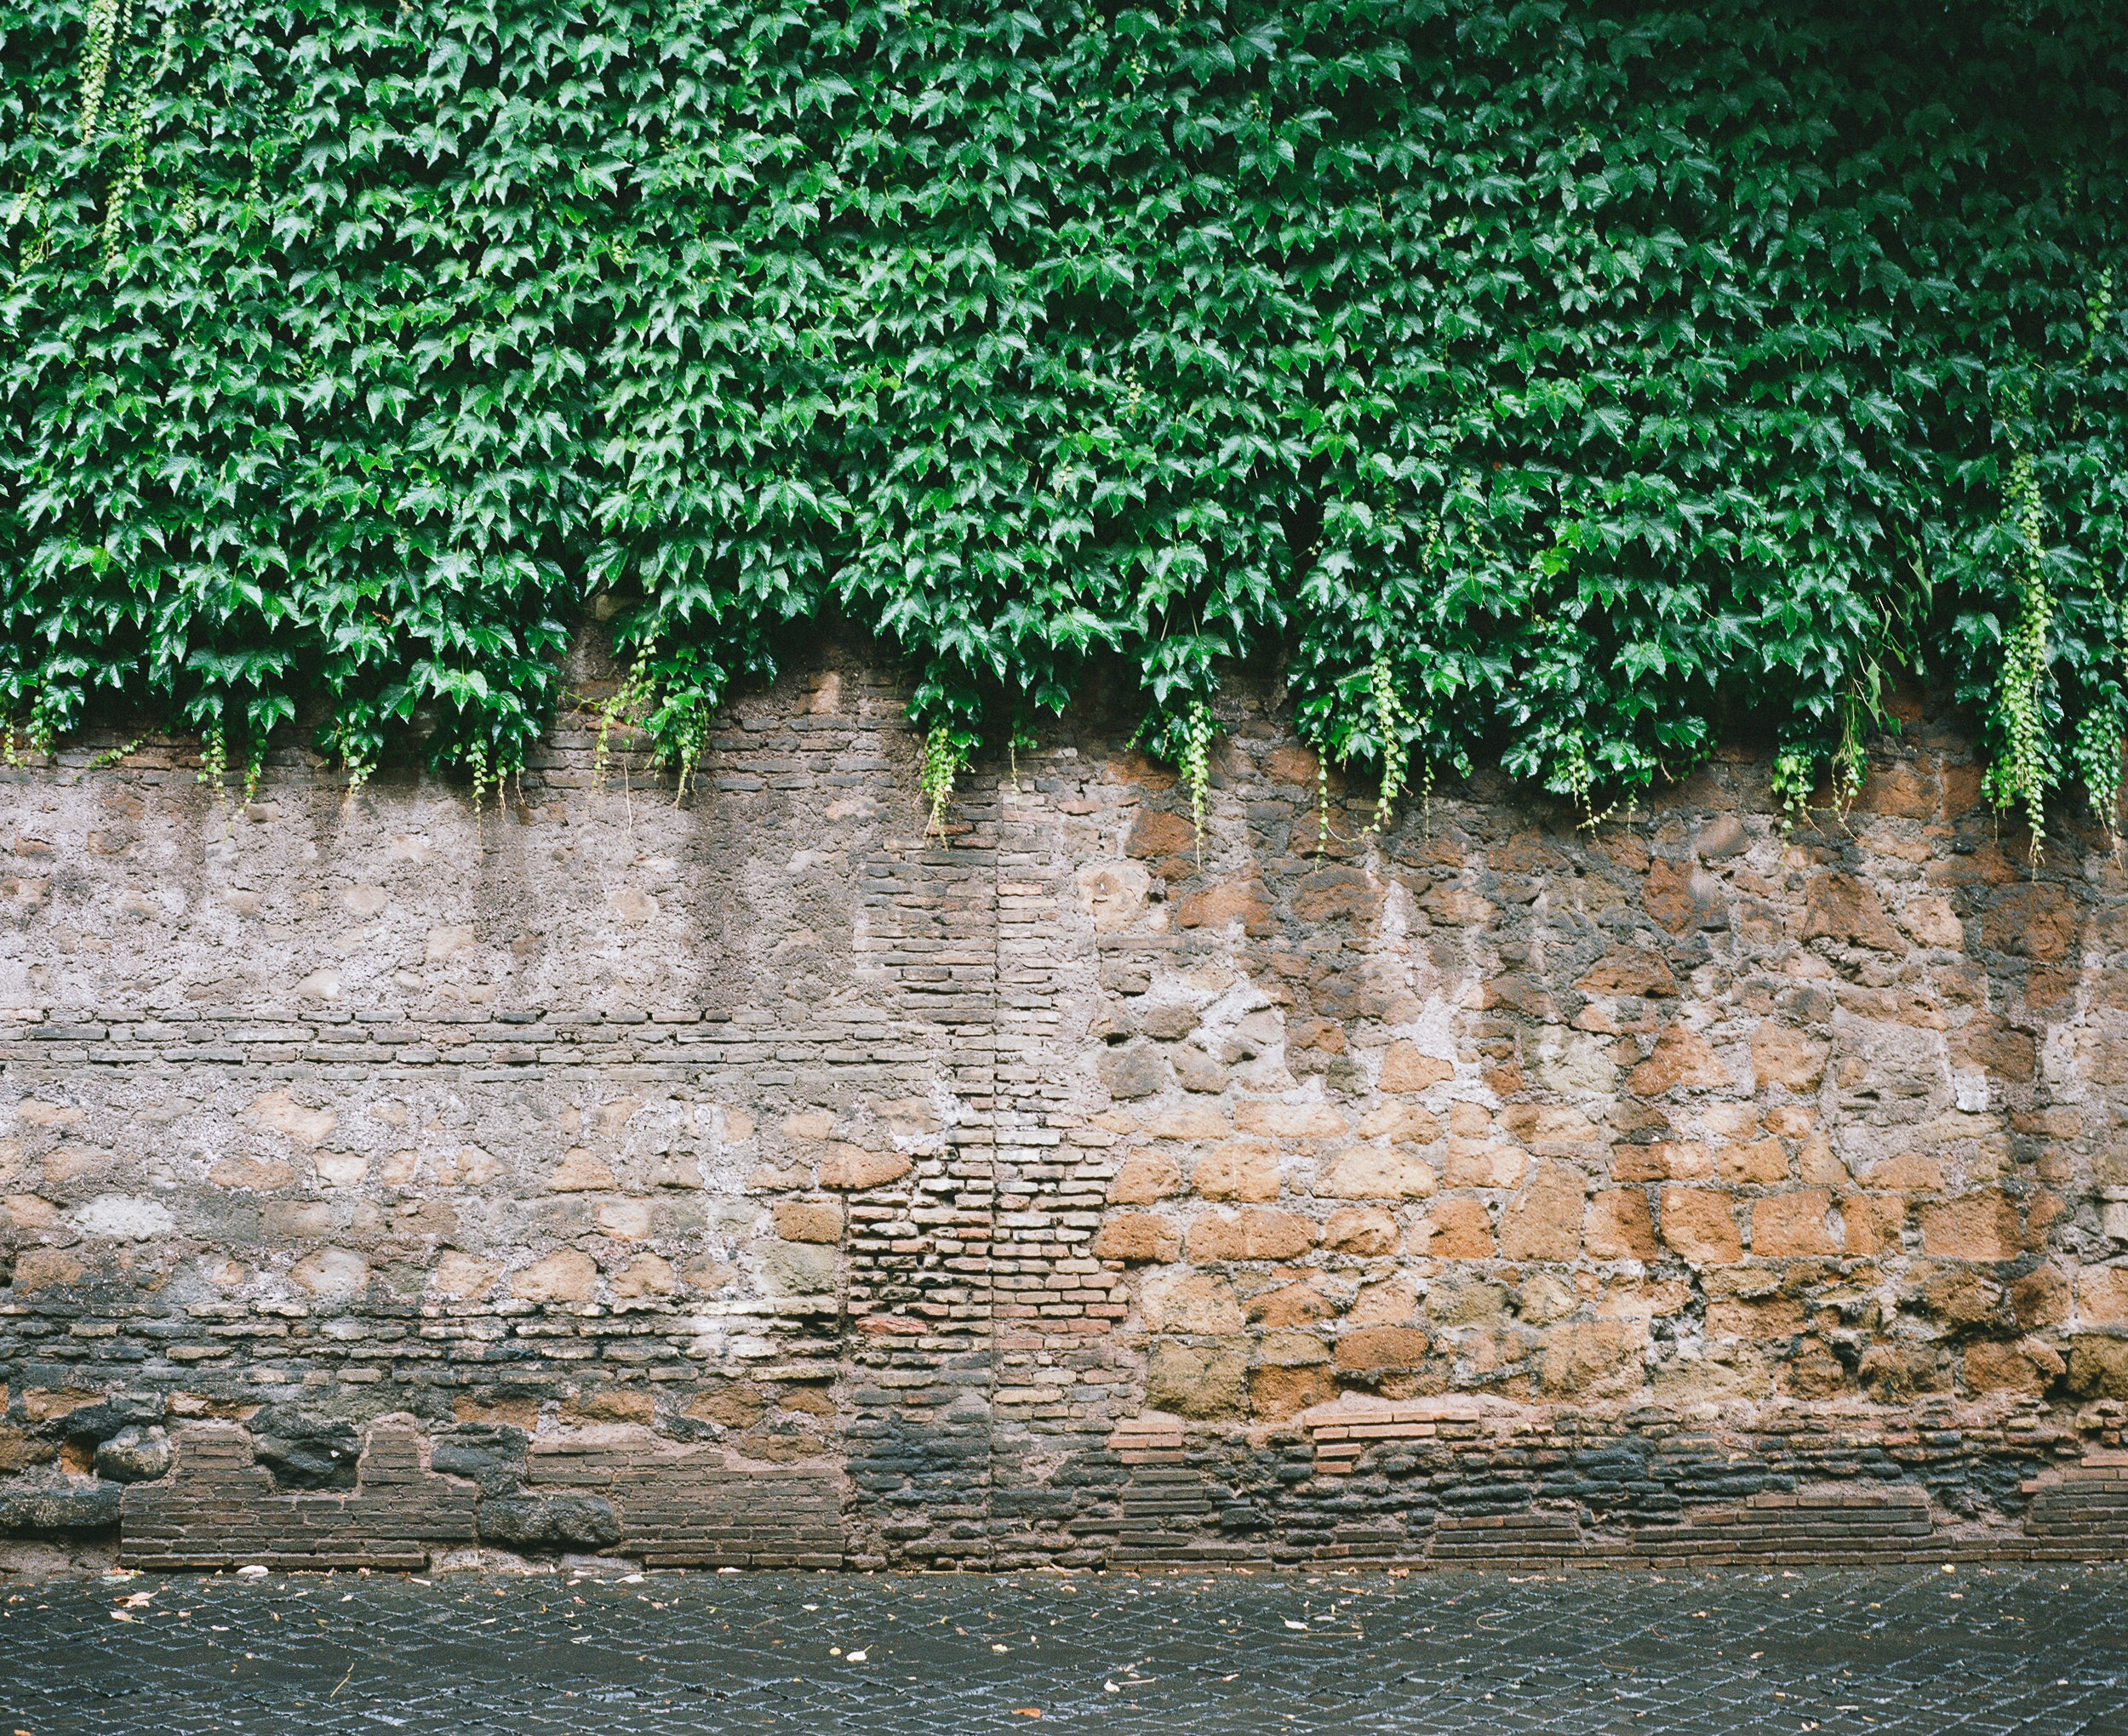 Ivy covered wall in Rome, Italy